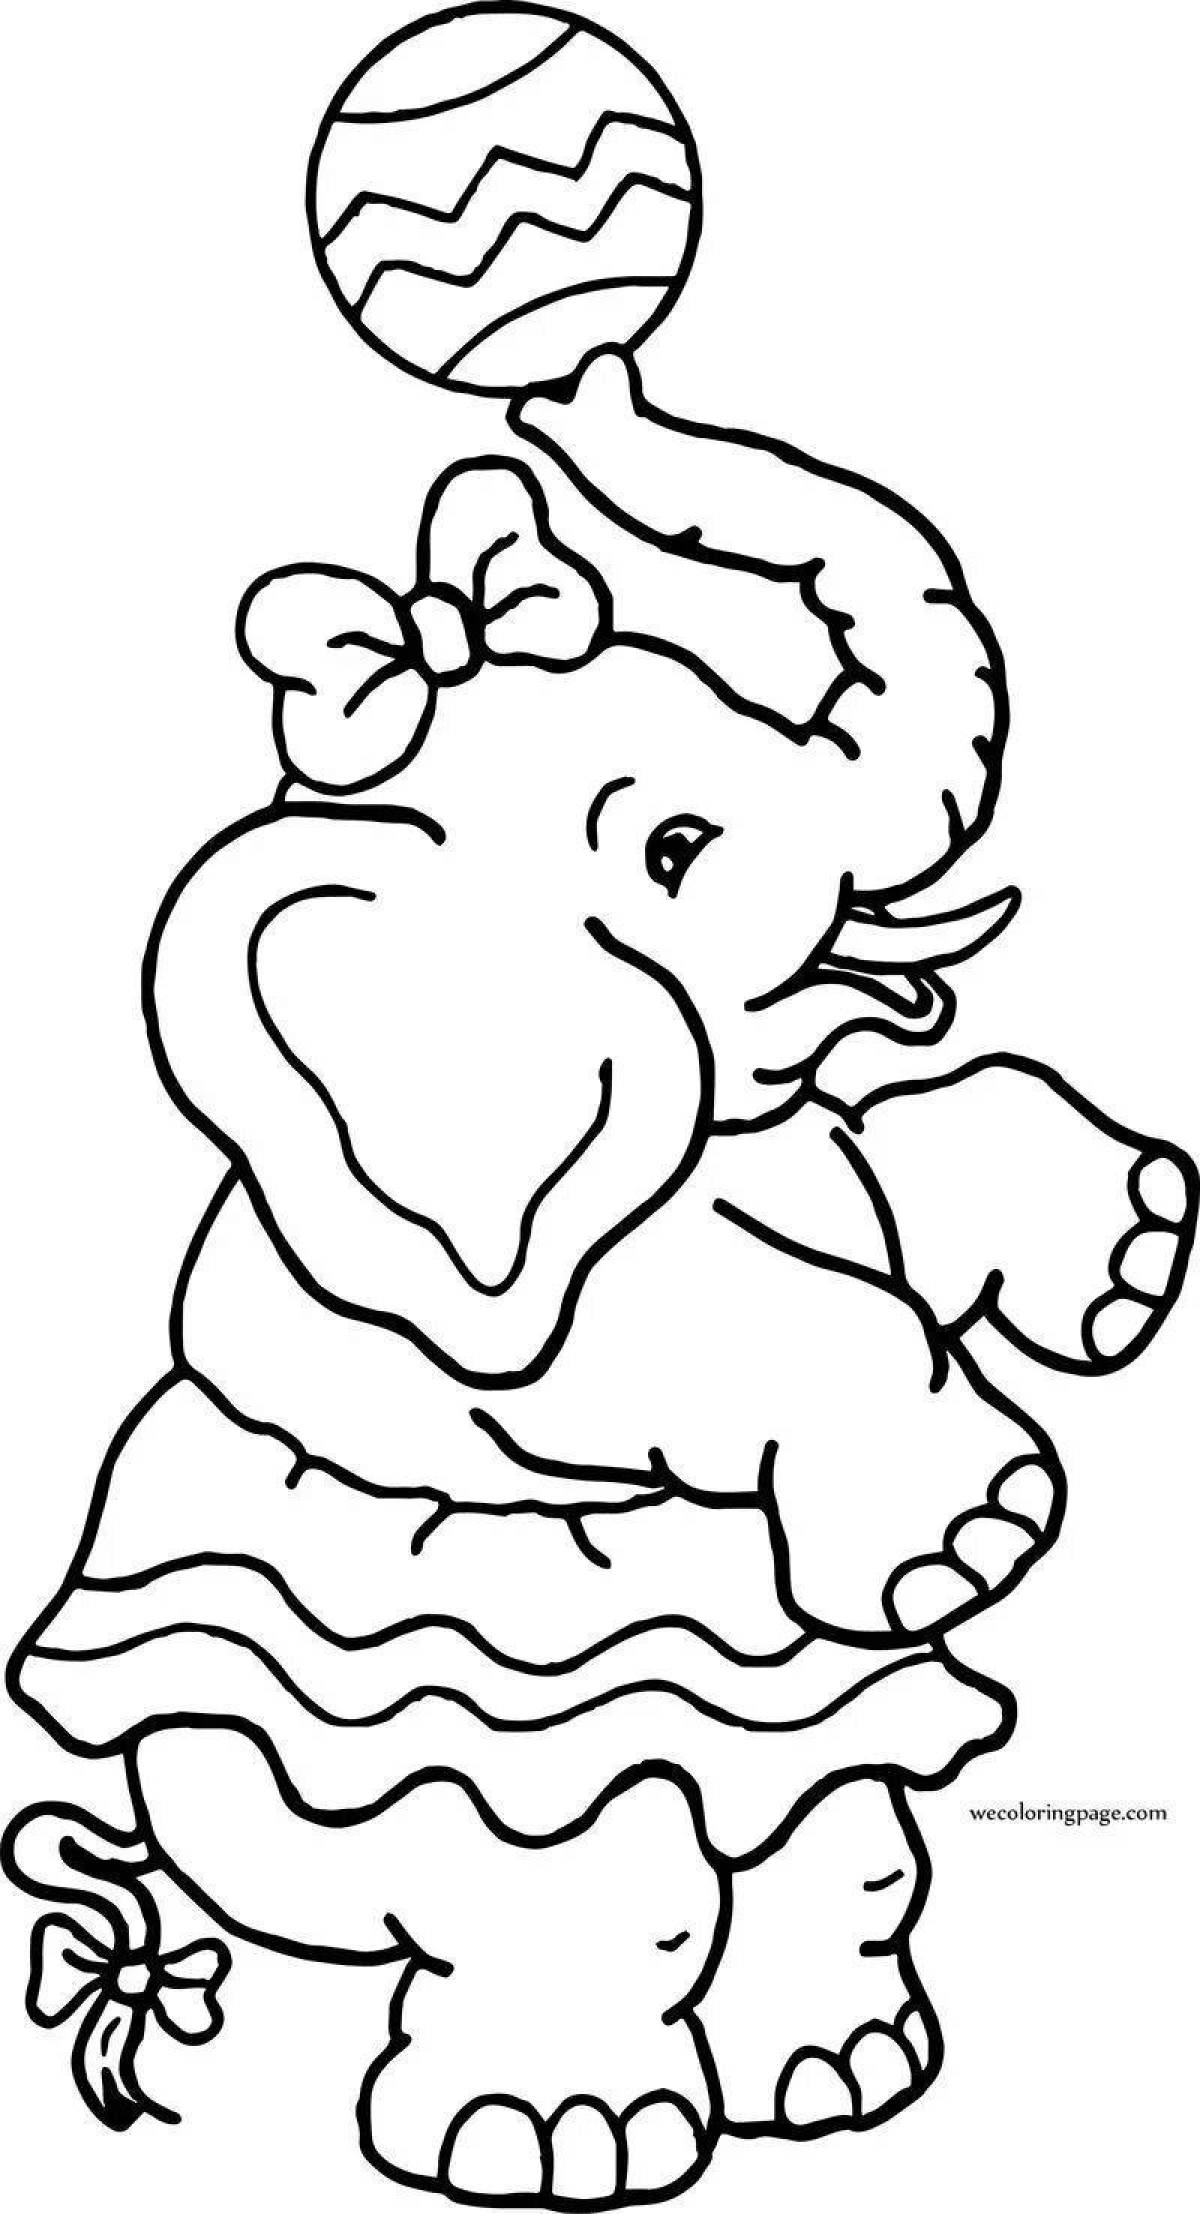 Impressive circus elephant coloring page